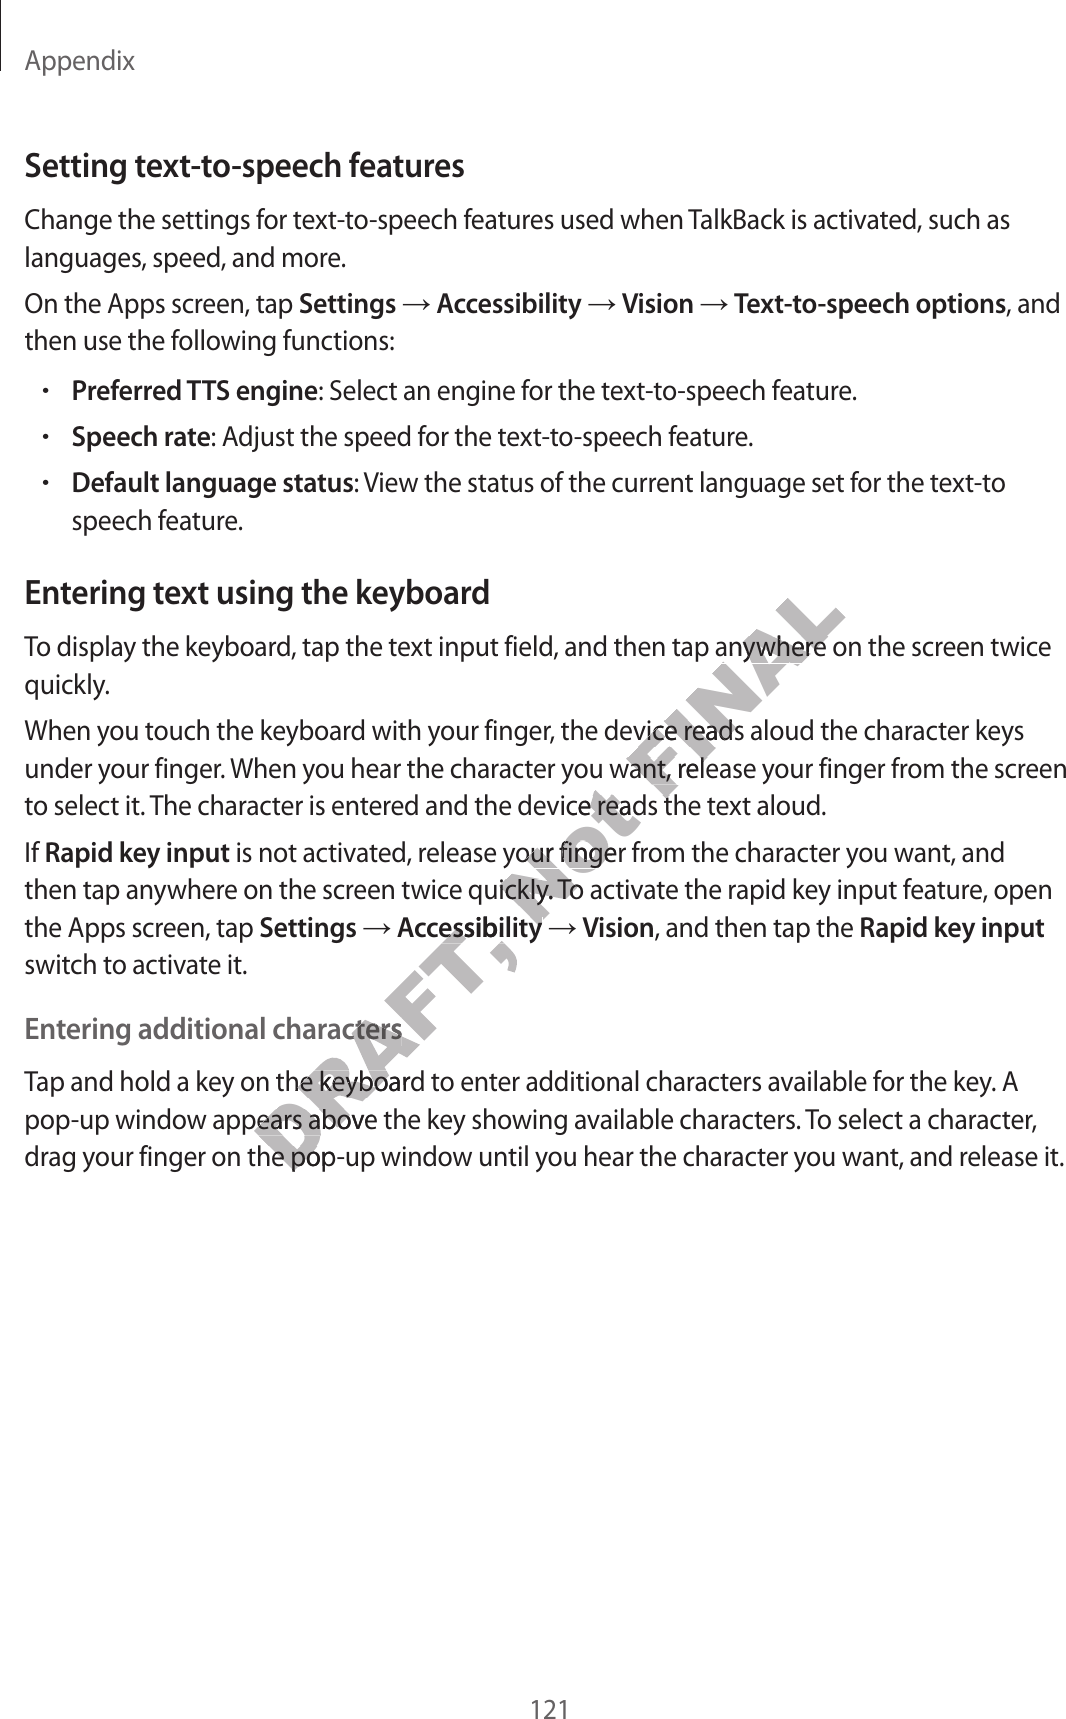 Appendix121Setting text-to-speech featuresChange the settings for text-to-speech features used when TalkBack is activated, such as languages, speed, and more.On the Apps screen, tap Settings  Accessibility  Vision  Text-to-speech options, and then use the following functions:•Preferred TTS engine: Select an engine for the text-to-speech feature.•Speech rate: Adjust the speed for the text-to-speech feature.•Default language status: View the status of the current language set for the text-to speech feature.Entering text using the keyboardTo display the keyboard, tap the text input field, and then tap anywhere on the screen twice quickly.When you touch the keyboard with your finger, the device reads aloud the character keys under your finger. When you hear the character you want, release your finger from the screen to select it. The character is entered and the device reads the text aloud.If Rapid key input is not activated, release your finger from the character you want, and then tap anywhere on the screen twice quickly. To activate the rapid key input feature, open the Apps screen, tap Settings  Accessibility  Vision, and then tap the Rapid key input switch to activate it.Entering additional charactersTap and hold a key on the keyboard to enter additional characters available for the key. A pop-up window appears above the key showing available characters. To select a character, drag your finger on the pop-up window until you hear the character you want, and release it.ccessibilitccessibilitering additional charactersering additional charactersDRAFT, ap and hold a key on the keyboard tap and hold a key on the keyboarw appears above the key show appears abovDRAFT, our finger on the pop-up windoour finger on the popNot ou wed and the device reads the ted and the device reads the telease your finger frelease your finger fre quickly. To ace quickly. To acessibilityessibilityFINAL, and then tap anywhere on the scr, and then tap anywhere on the scr, the device reads aloud the char, the device reads aloud the charou want, release you want, release yeads the teads the t